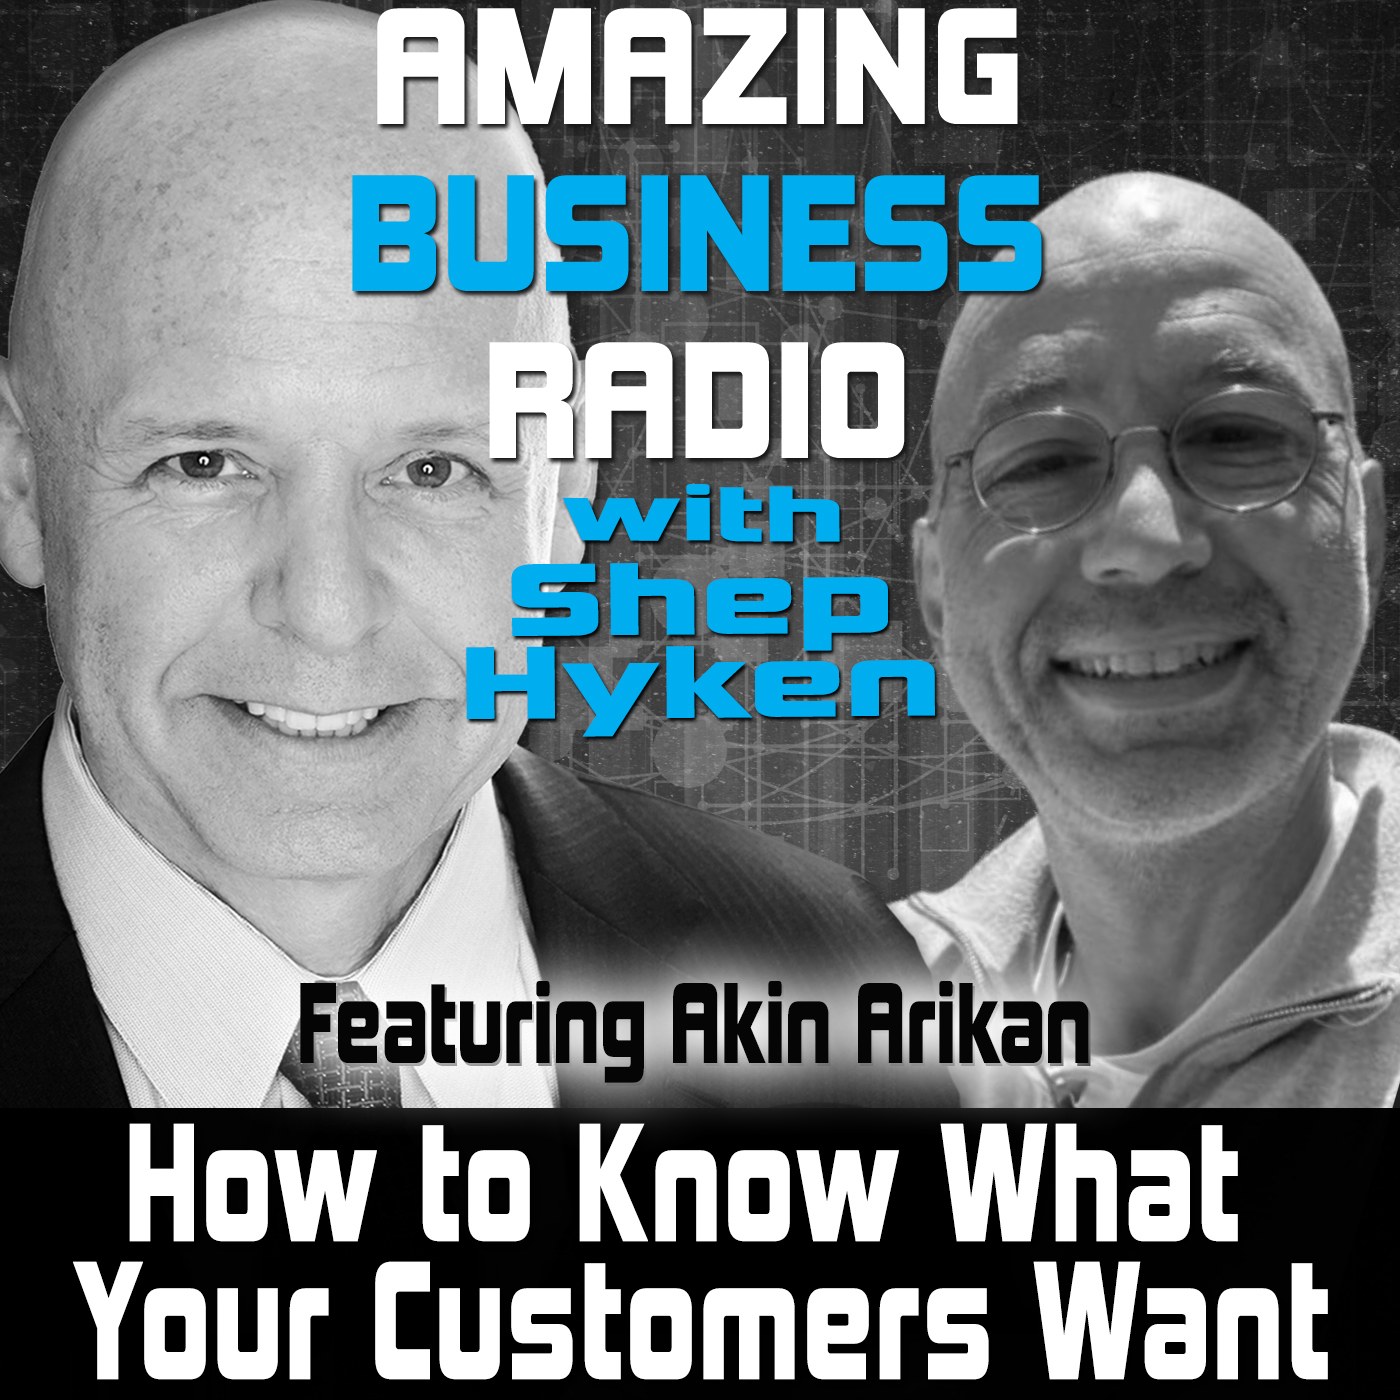 From “I’ll Be Back” to “Listen Up!”: Amazing Business Radio interview on How to Know What YOUR Customers Want